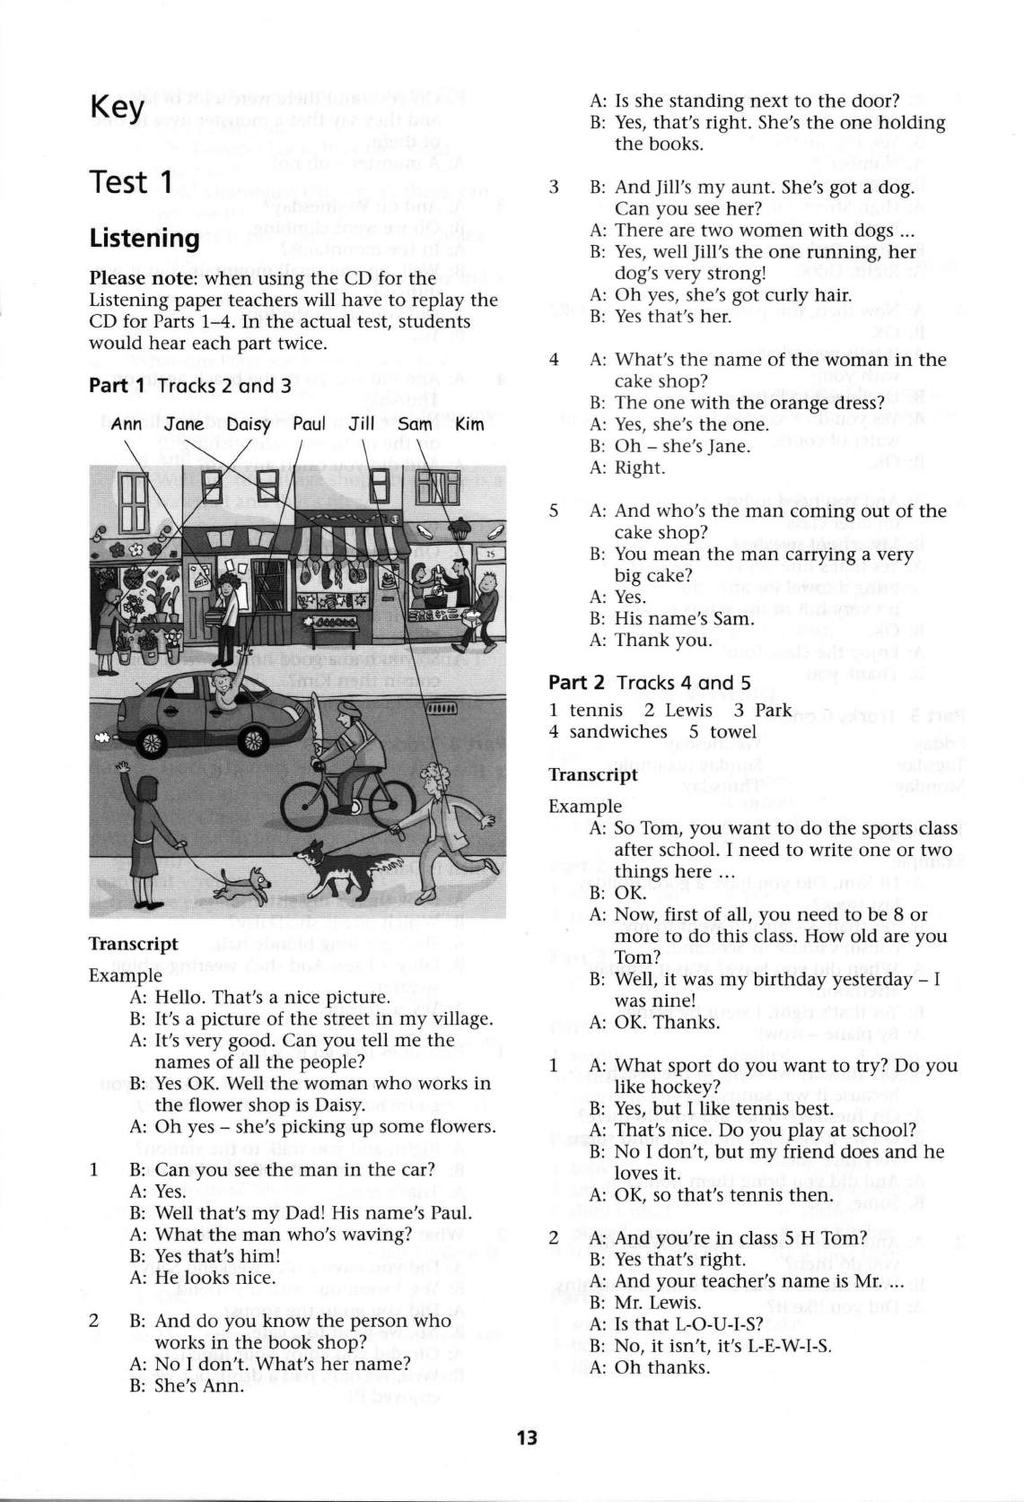 Key Test 1 Listening Please note: when using the CD for the Listening paper teachers will have to replay the CD for Parts 1-4. In the actual test, students would hear each part twice.